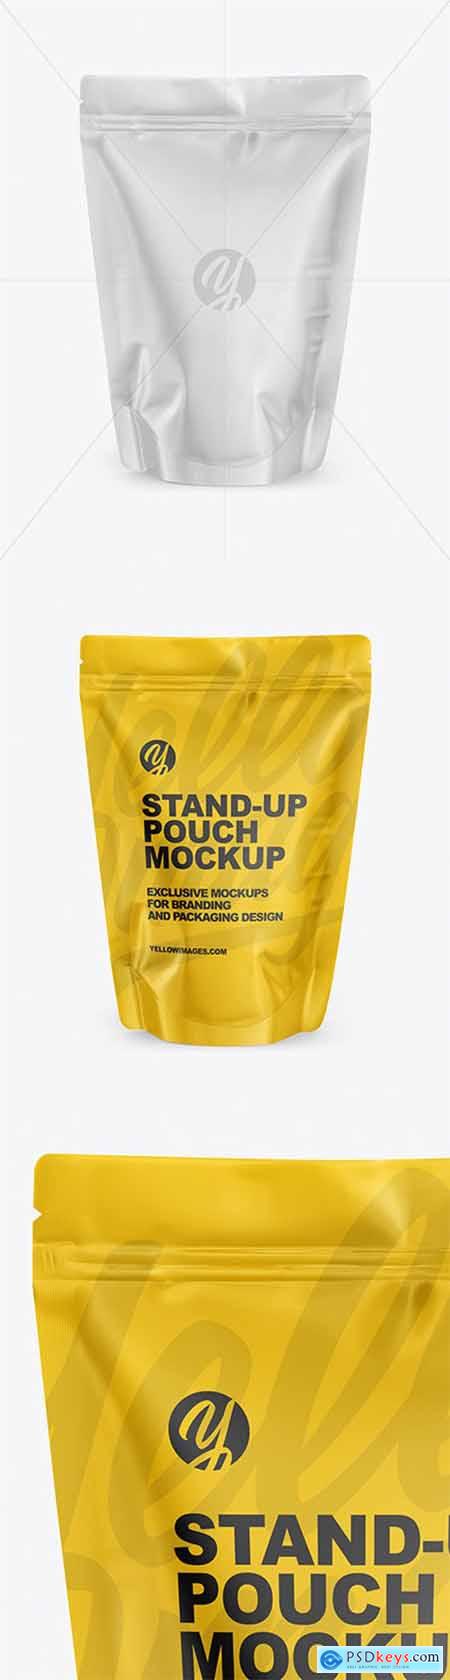 Glossy Stand-Up Pouch Mockup 64892